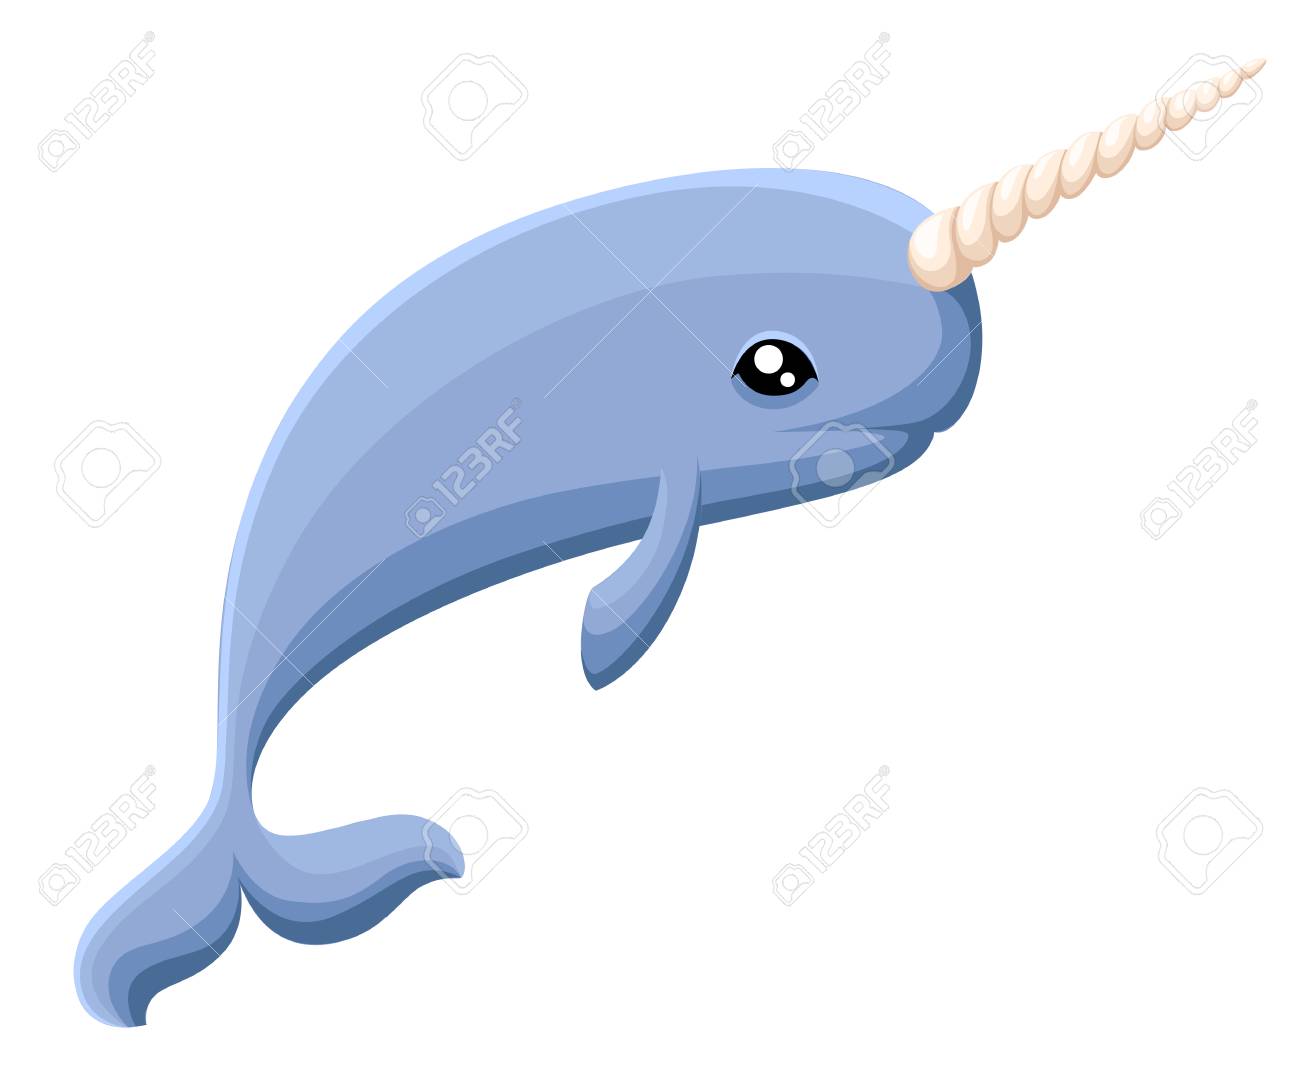 Narwhal Drawing at GetDrawings | Free download